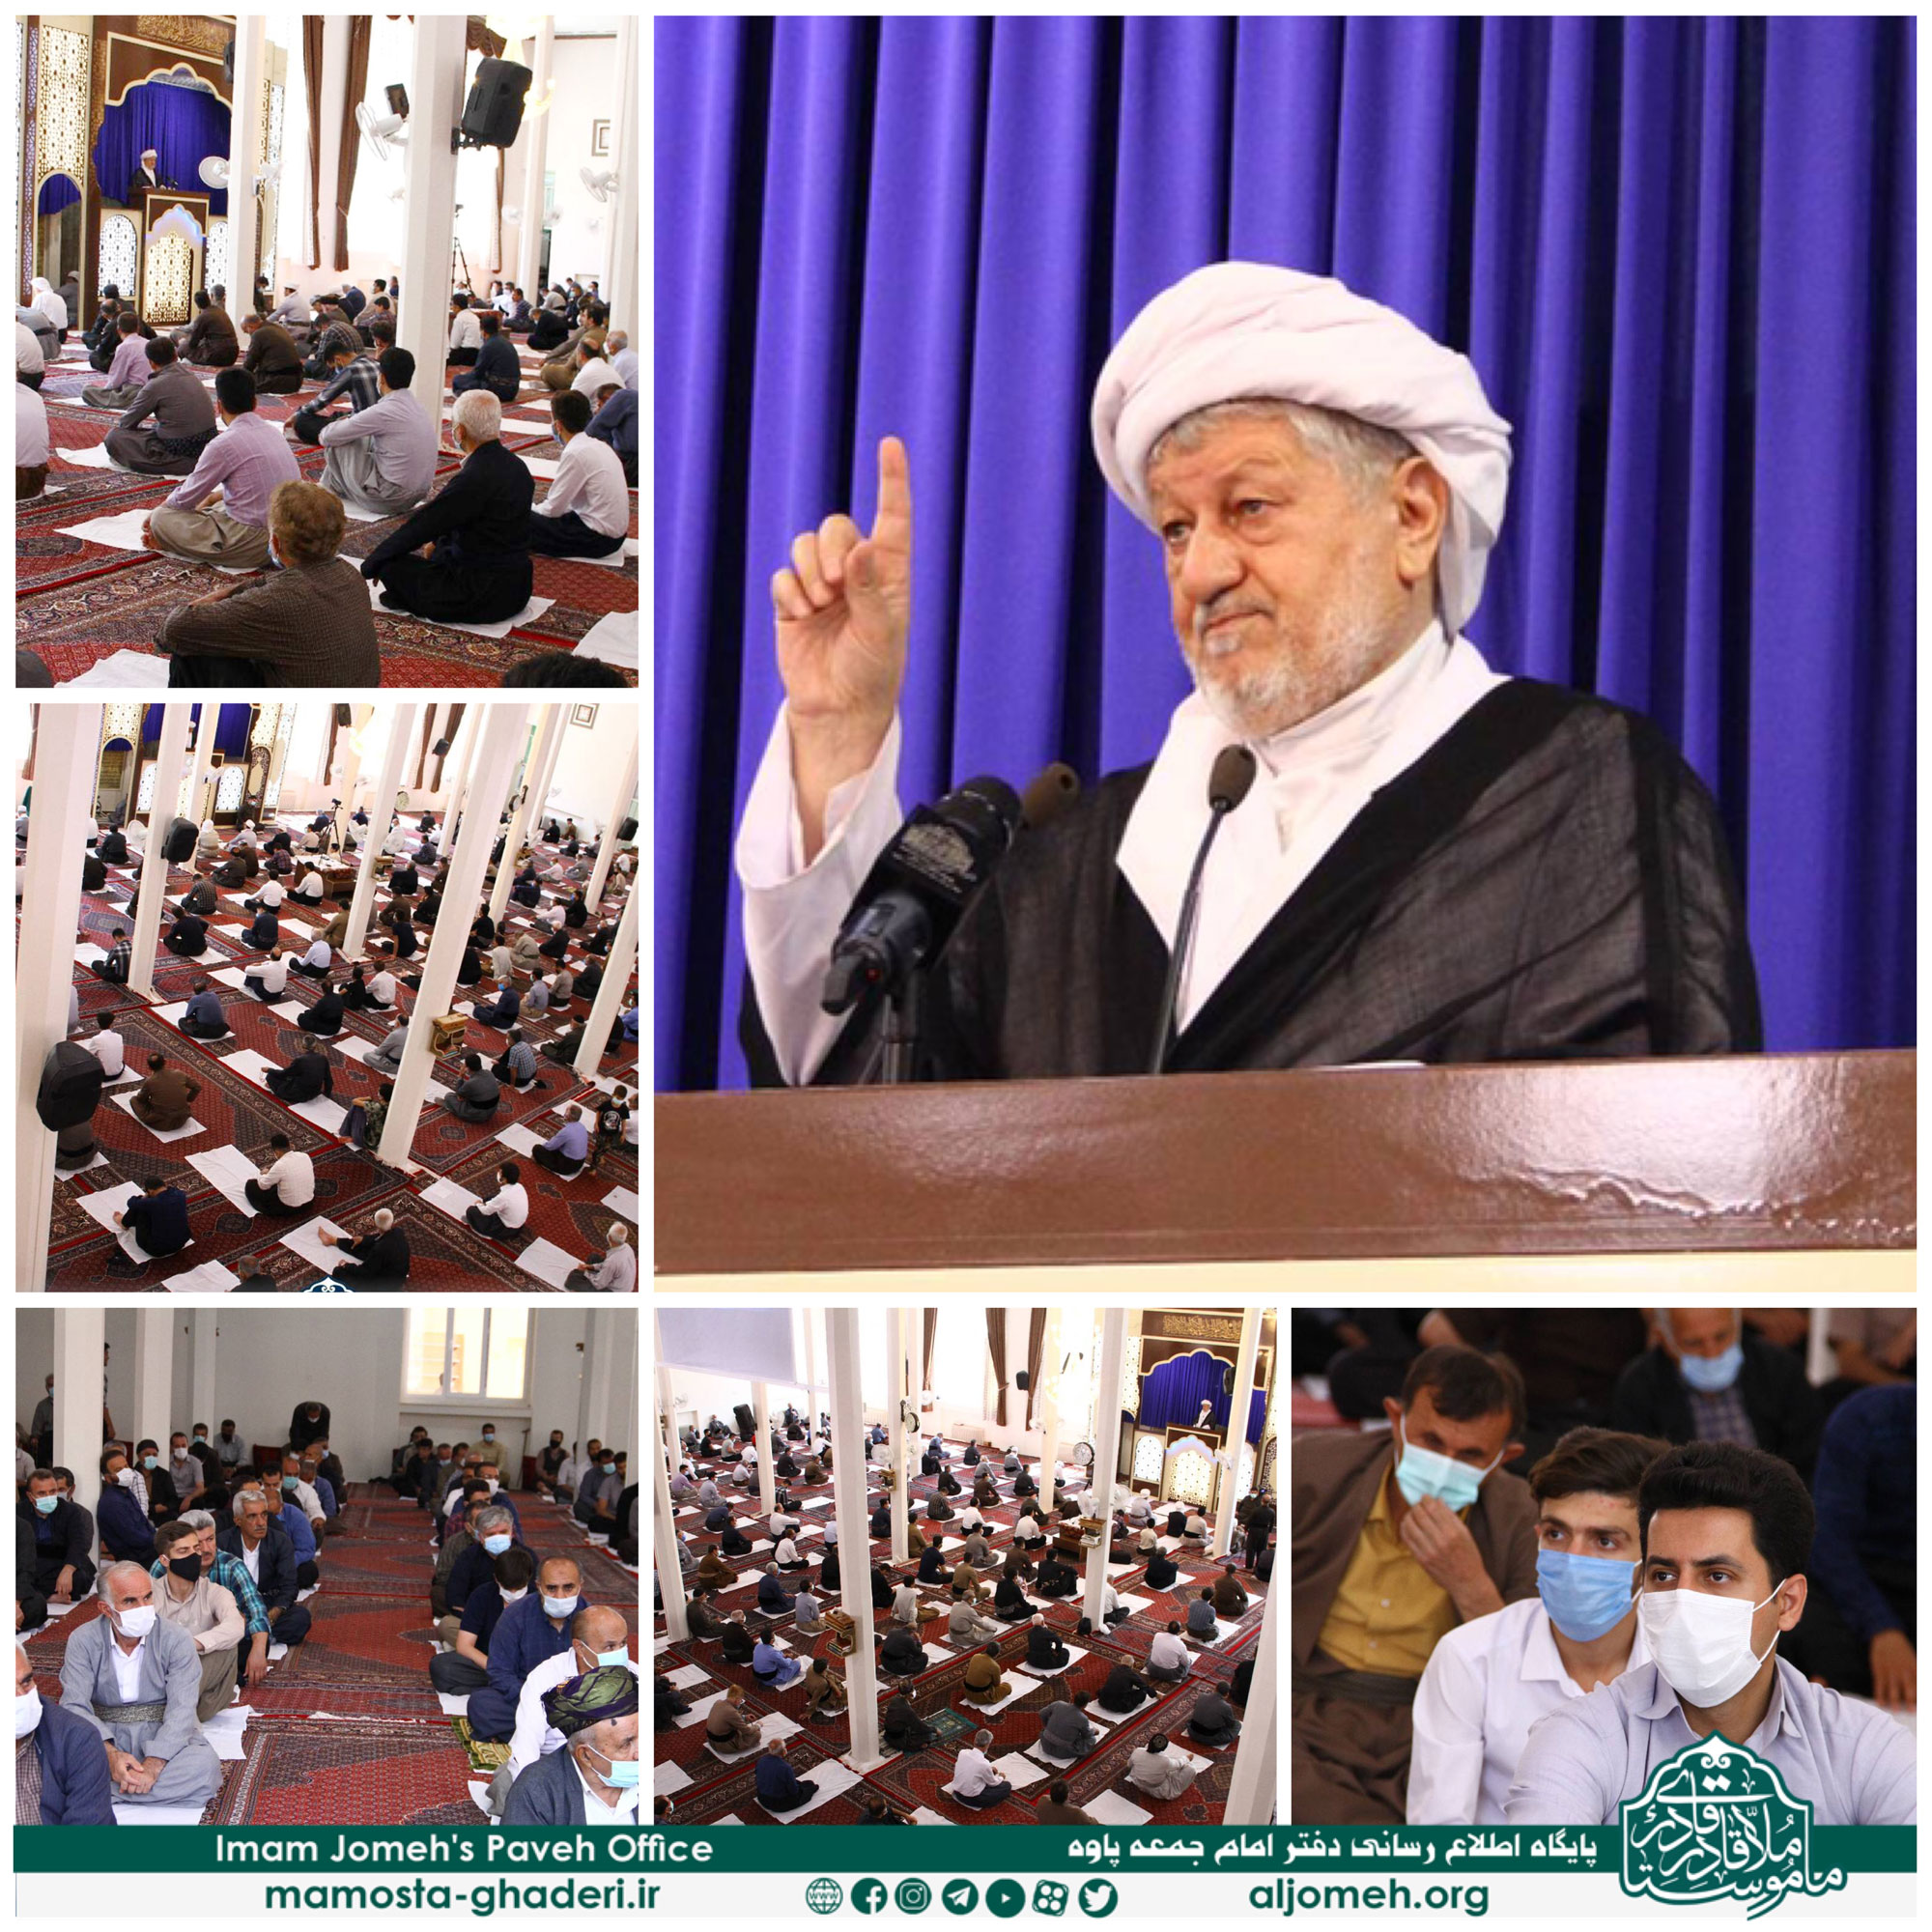 http://www.aljomeh.org/fa/images/stories/pic36/jomehpaveh-05-06-1400-02.jpg